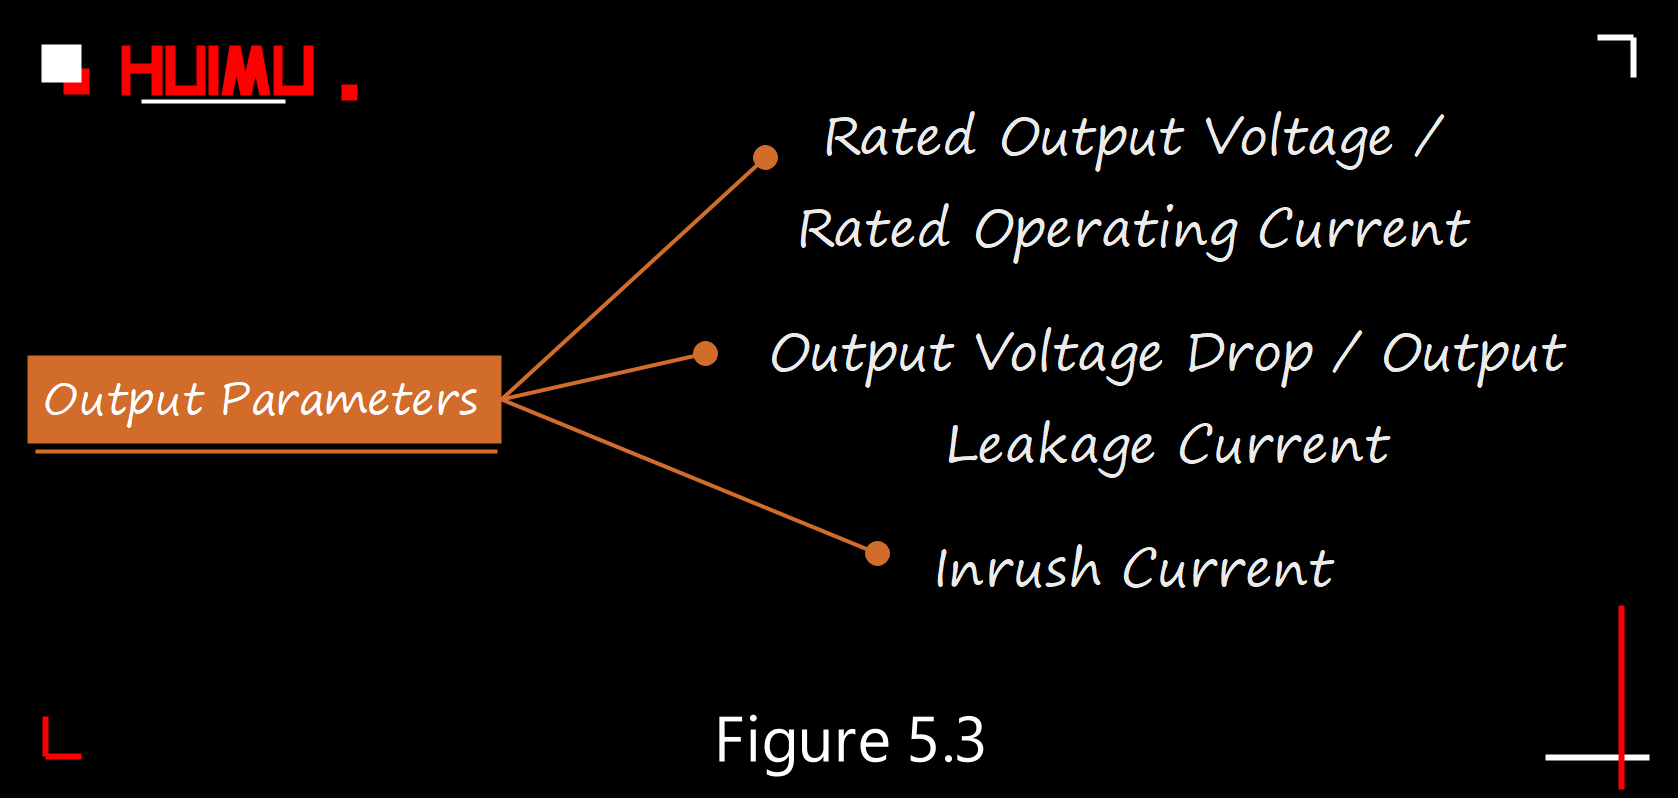 Output parameters of solid state relays